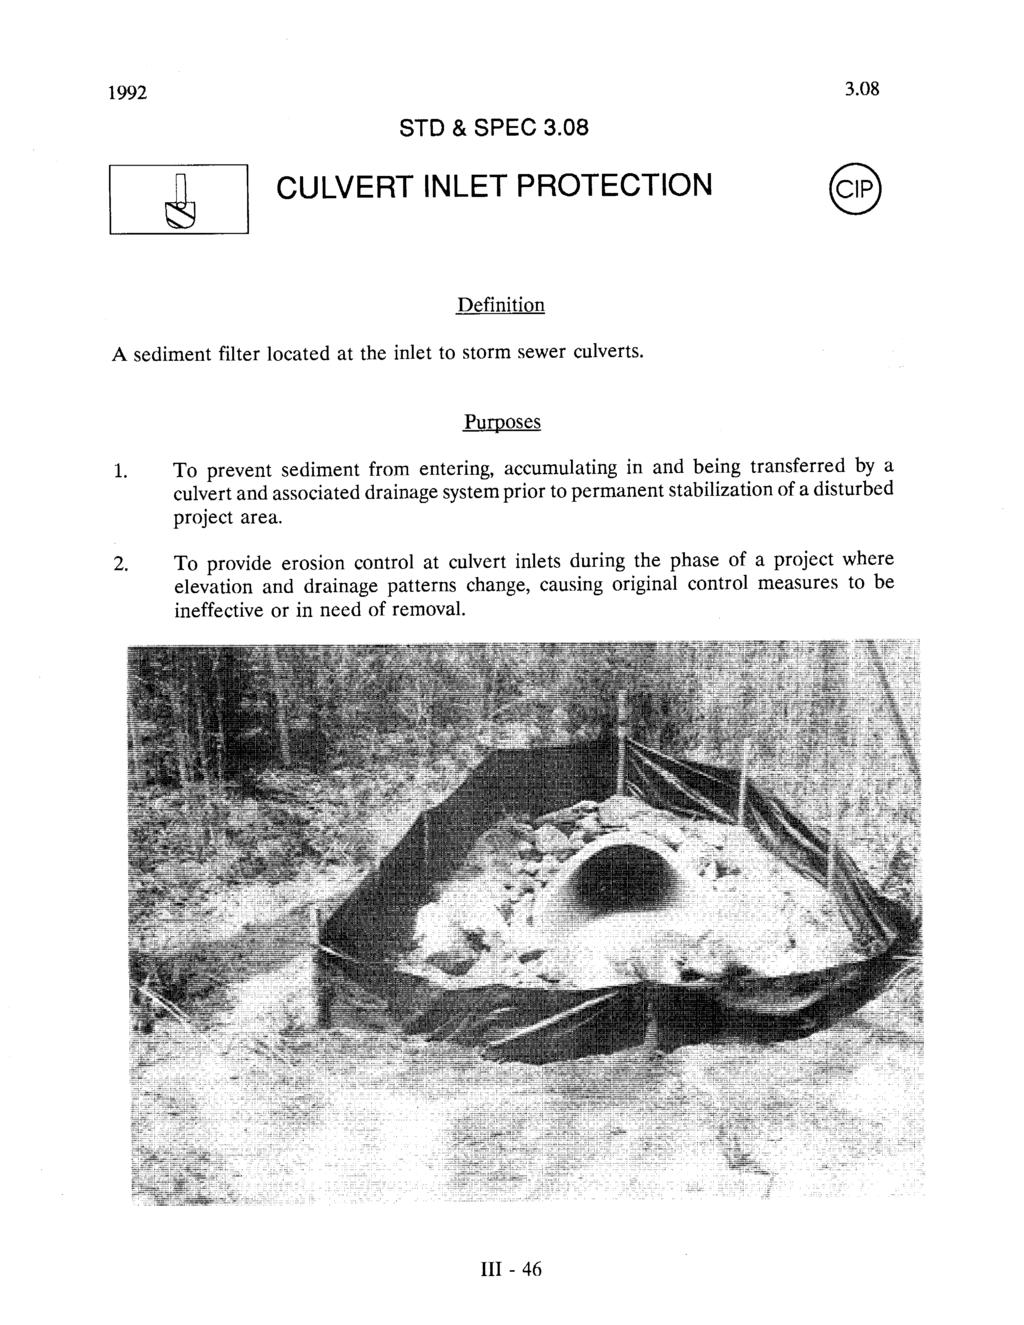 1992 STD & SPEC 3.8 3.8 IT] CULVERT INLET PROTECTION Definition A sediment filter located at the inlet to storm sewer culverts. Purposes 1.